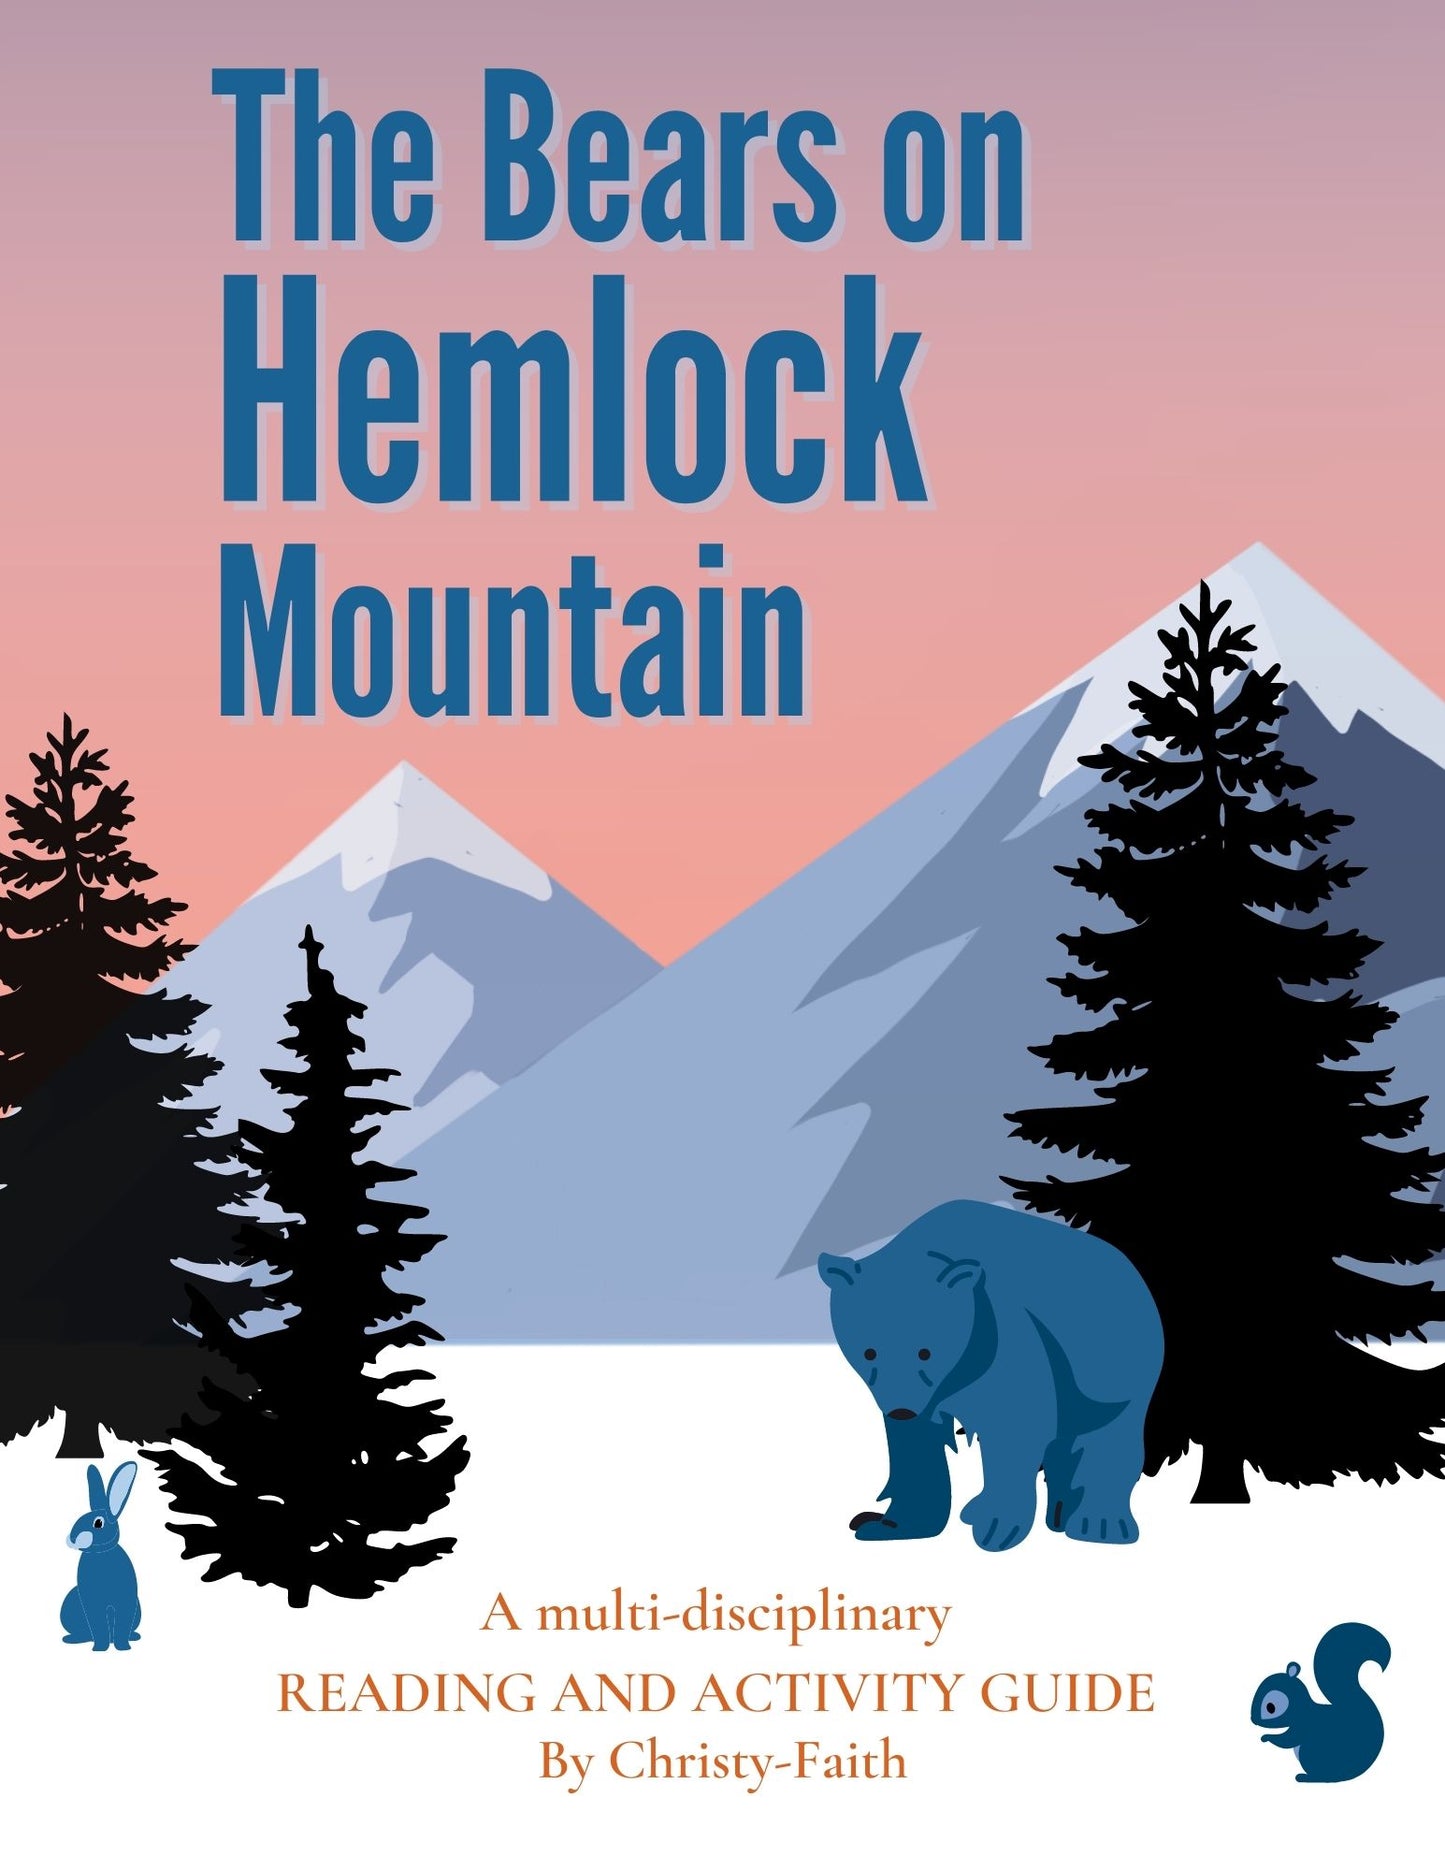 The Bears on Hemlock Mountain Reading and Activity Guide (Instant Download)